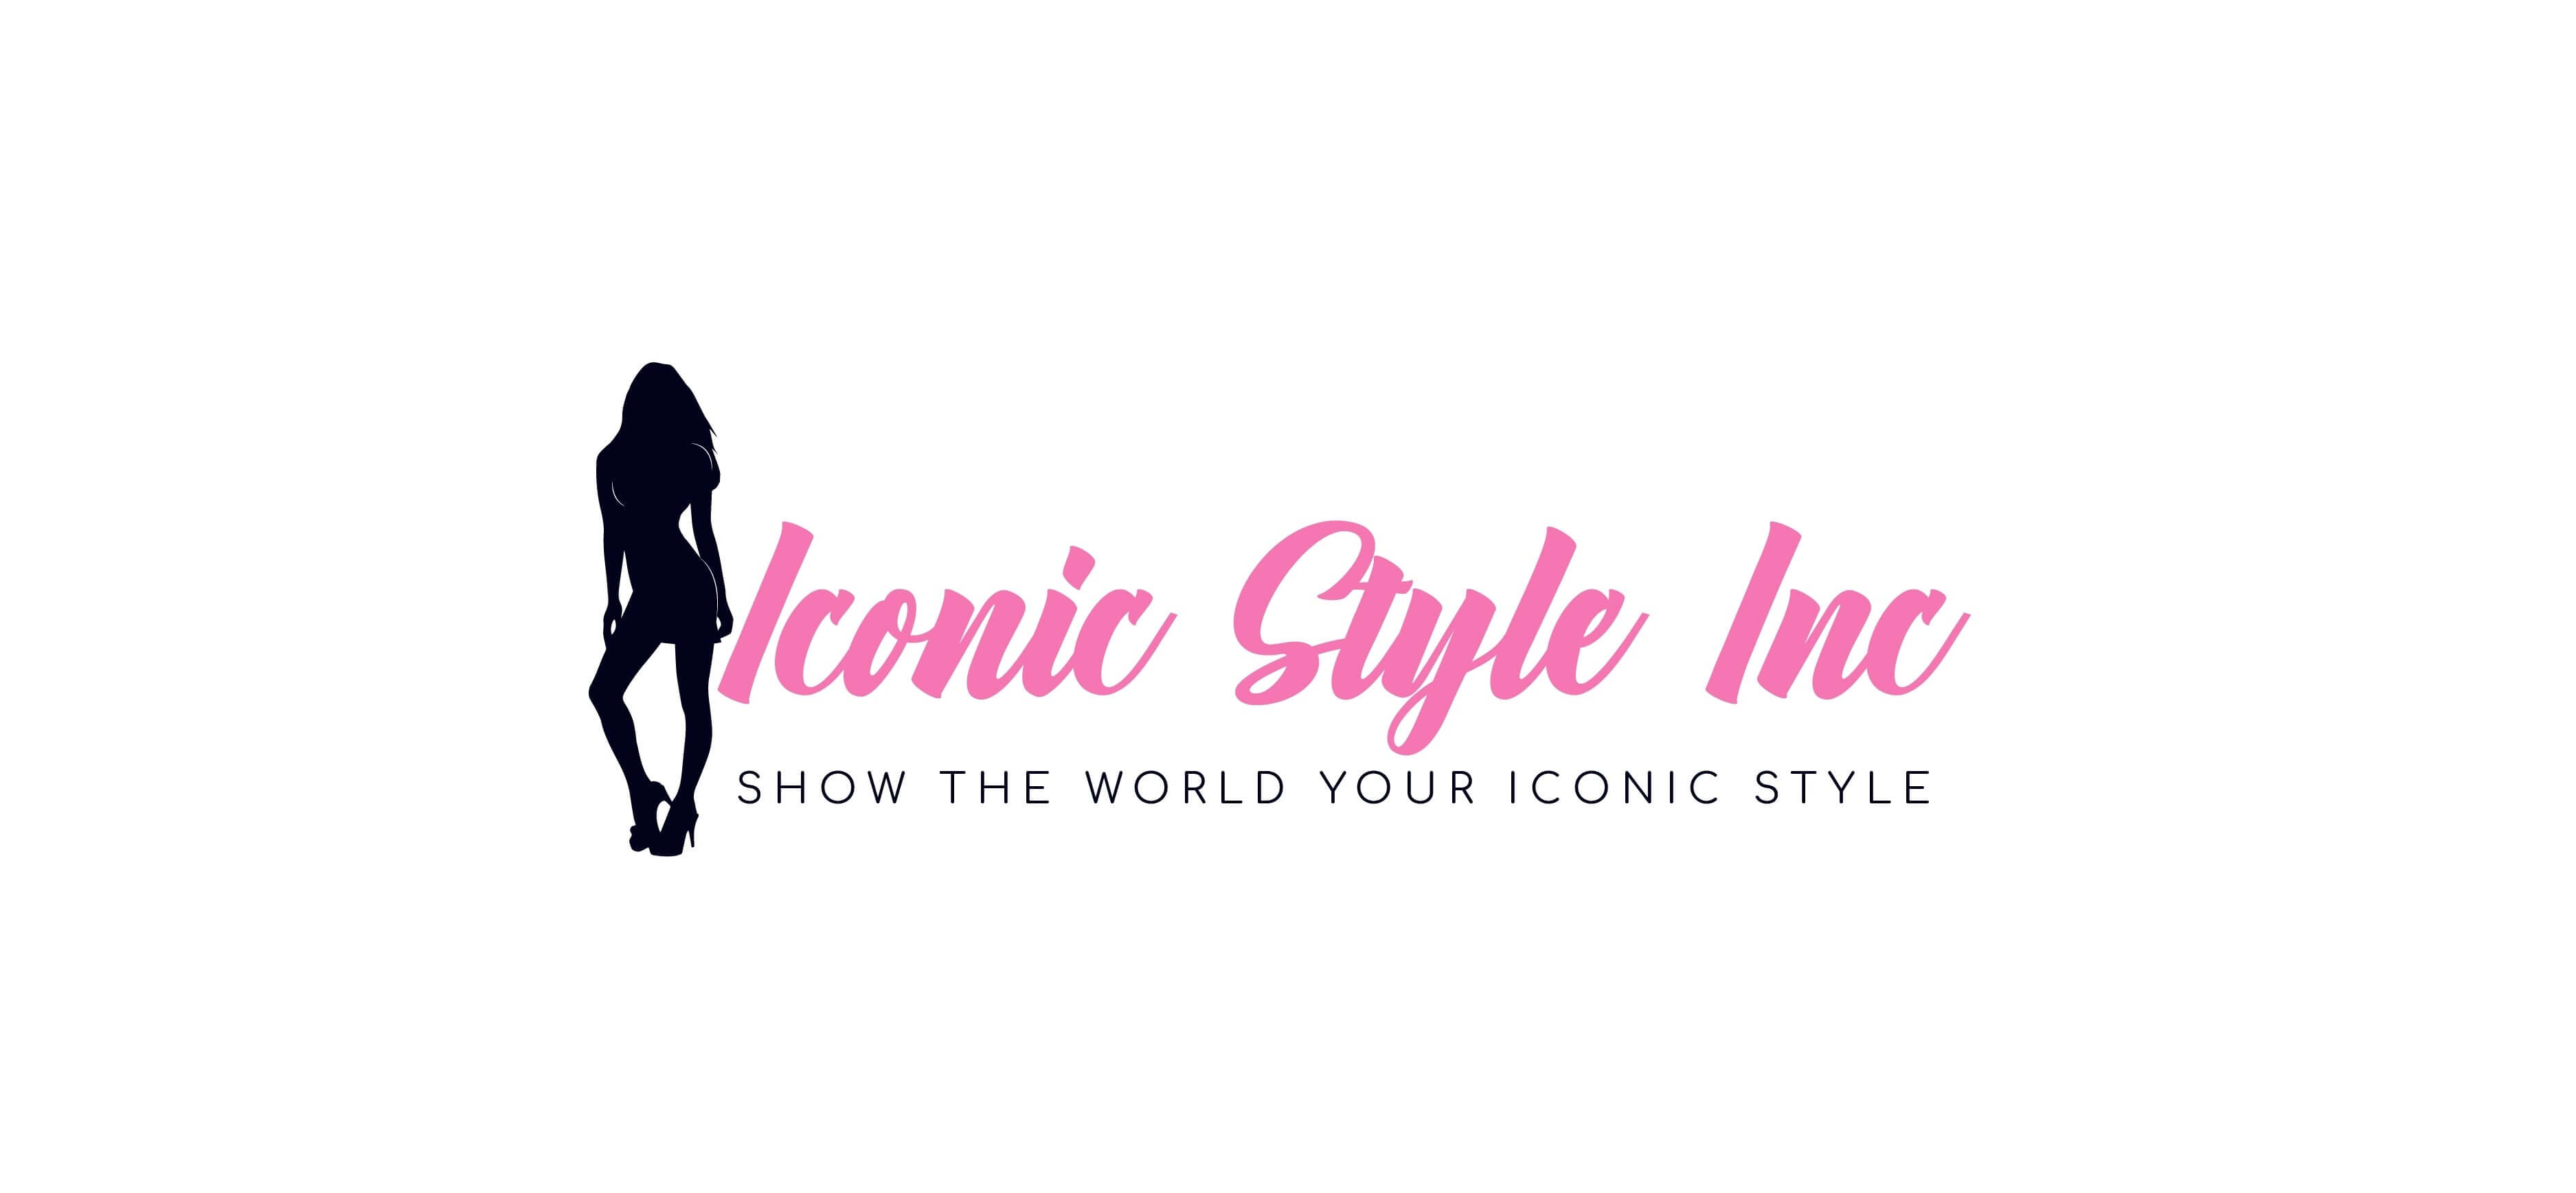 Iconic Style Inc Featured in CNF Mag!